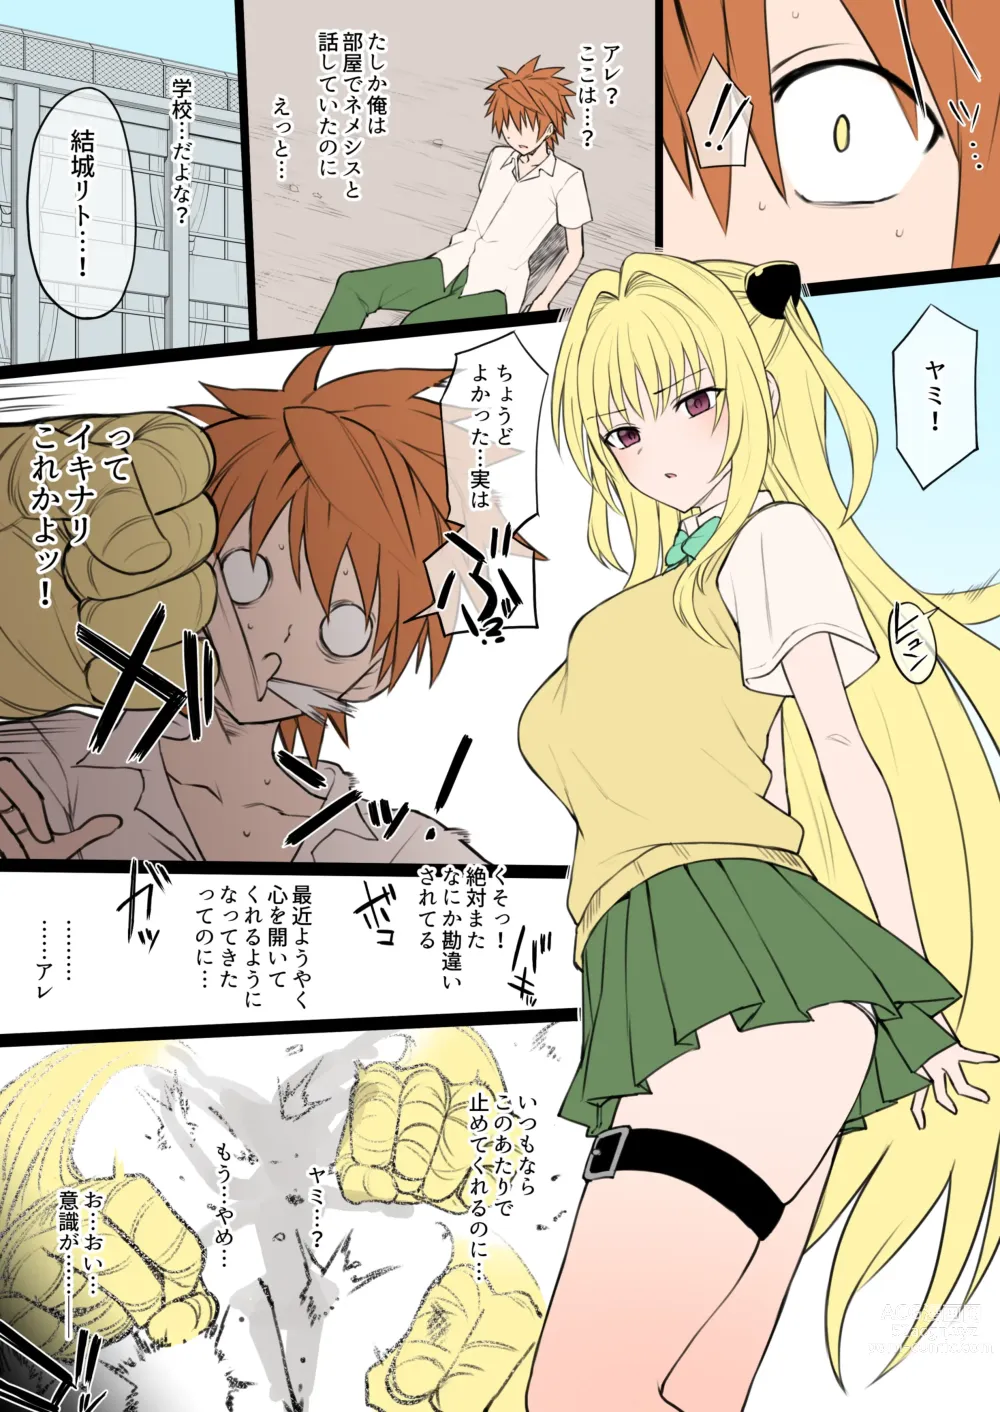 Page 3 of doujinshi toLOVE-Ru NTR masochist tendencies are drilled into his brain and he becomes a servant of Nemesis